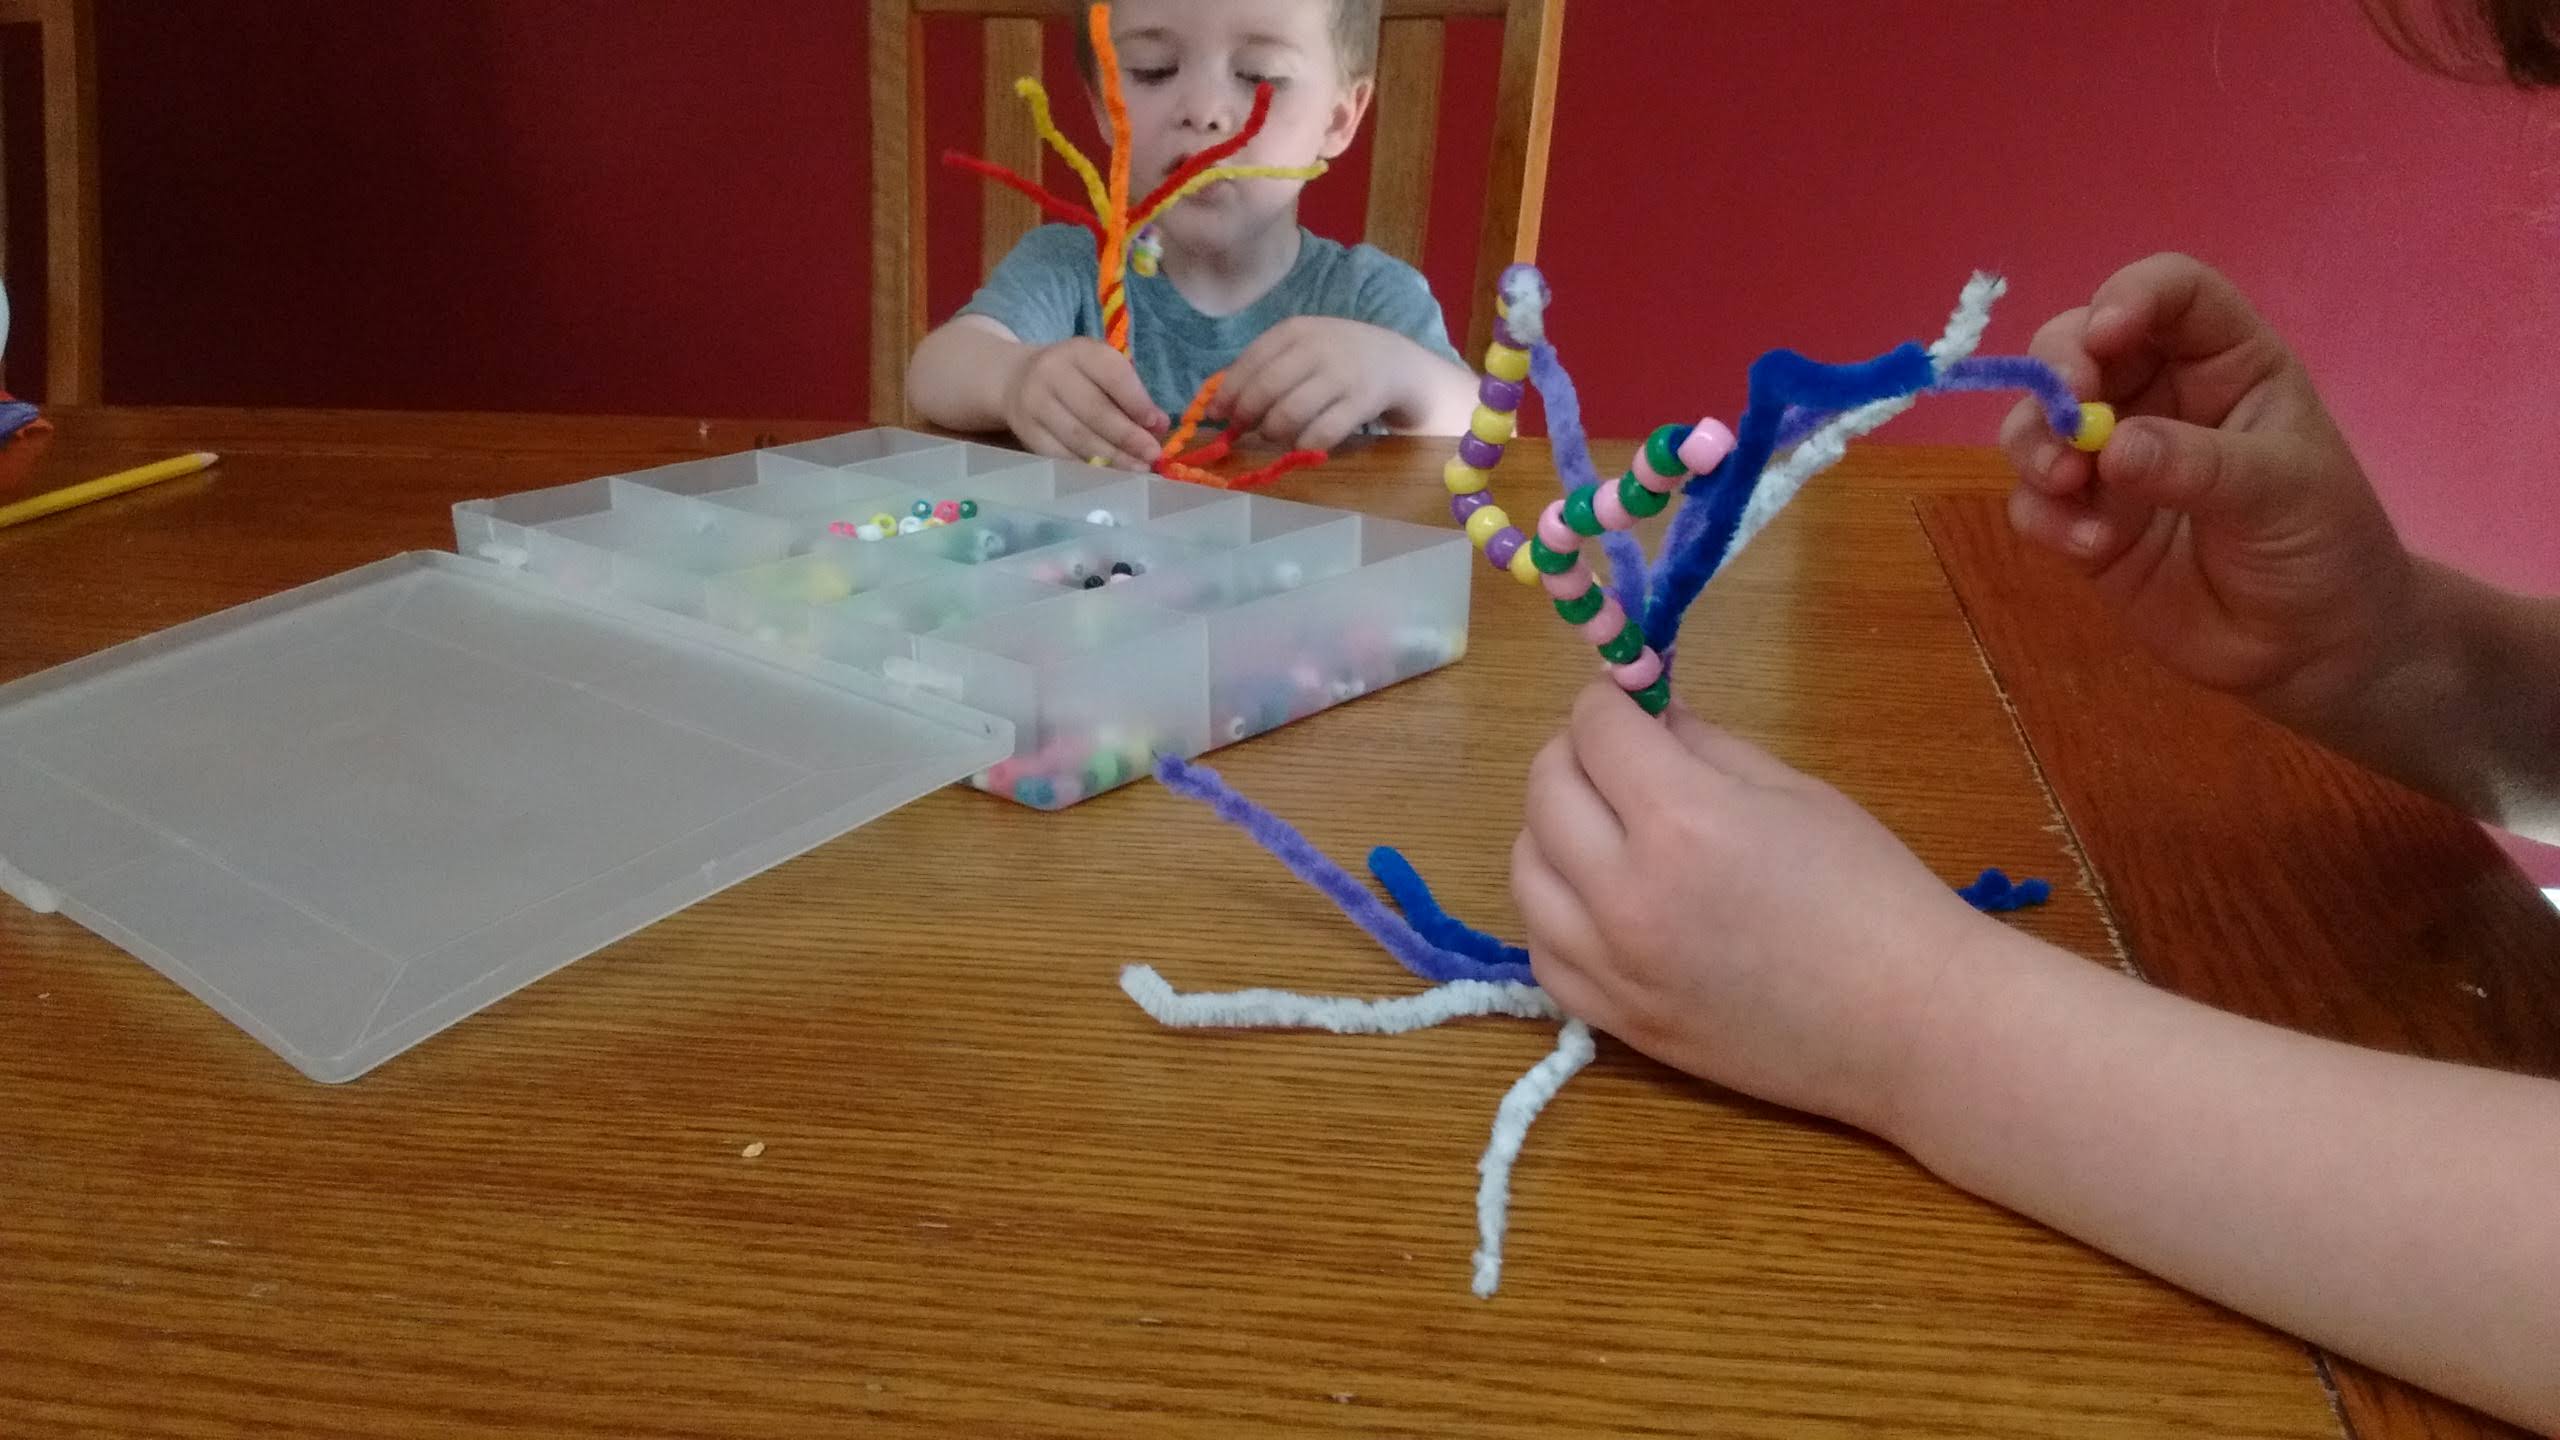 twist pipe cleaners together to form a tree with roots and branches, then thread pony beads on the branches